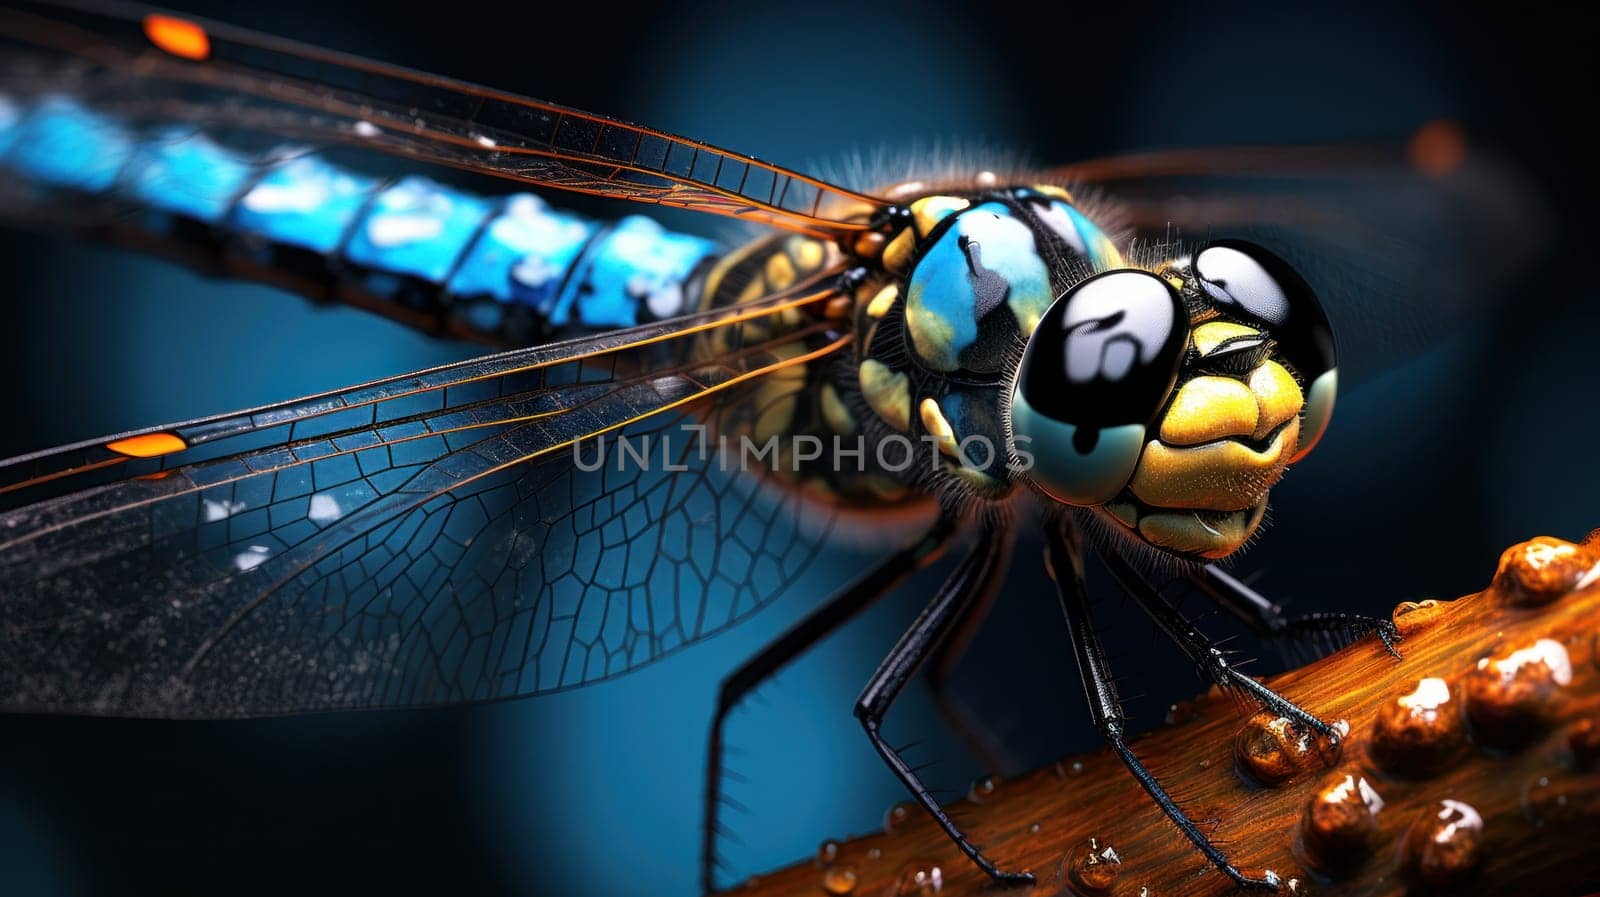 A close up of a dragonfly with blue and yellow eyes